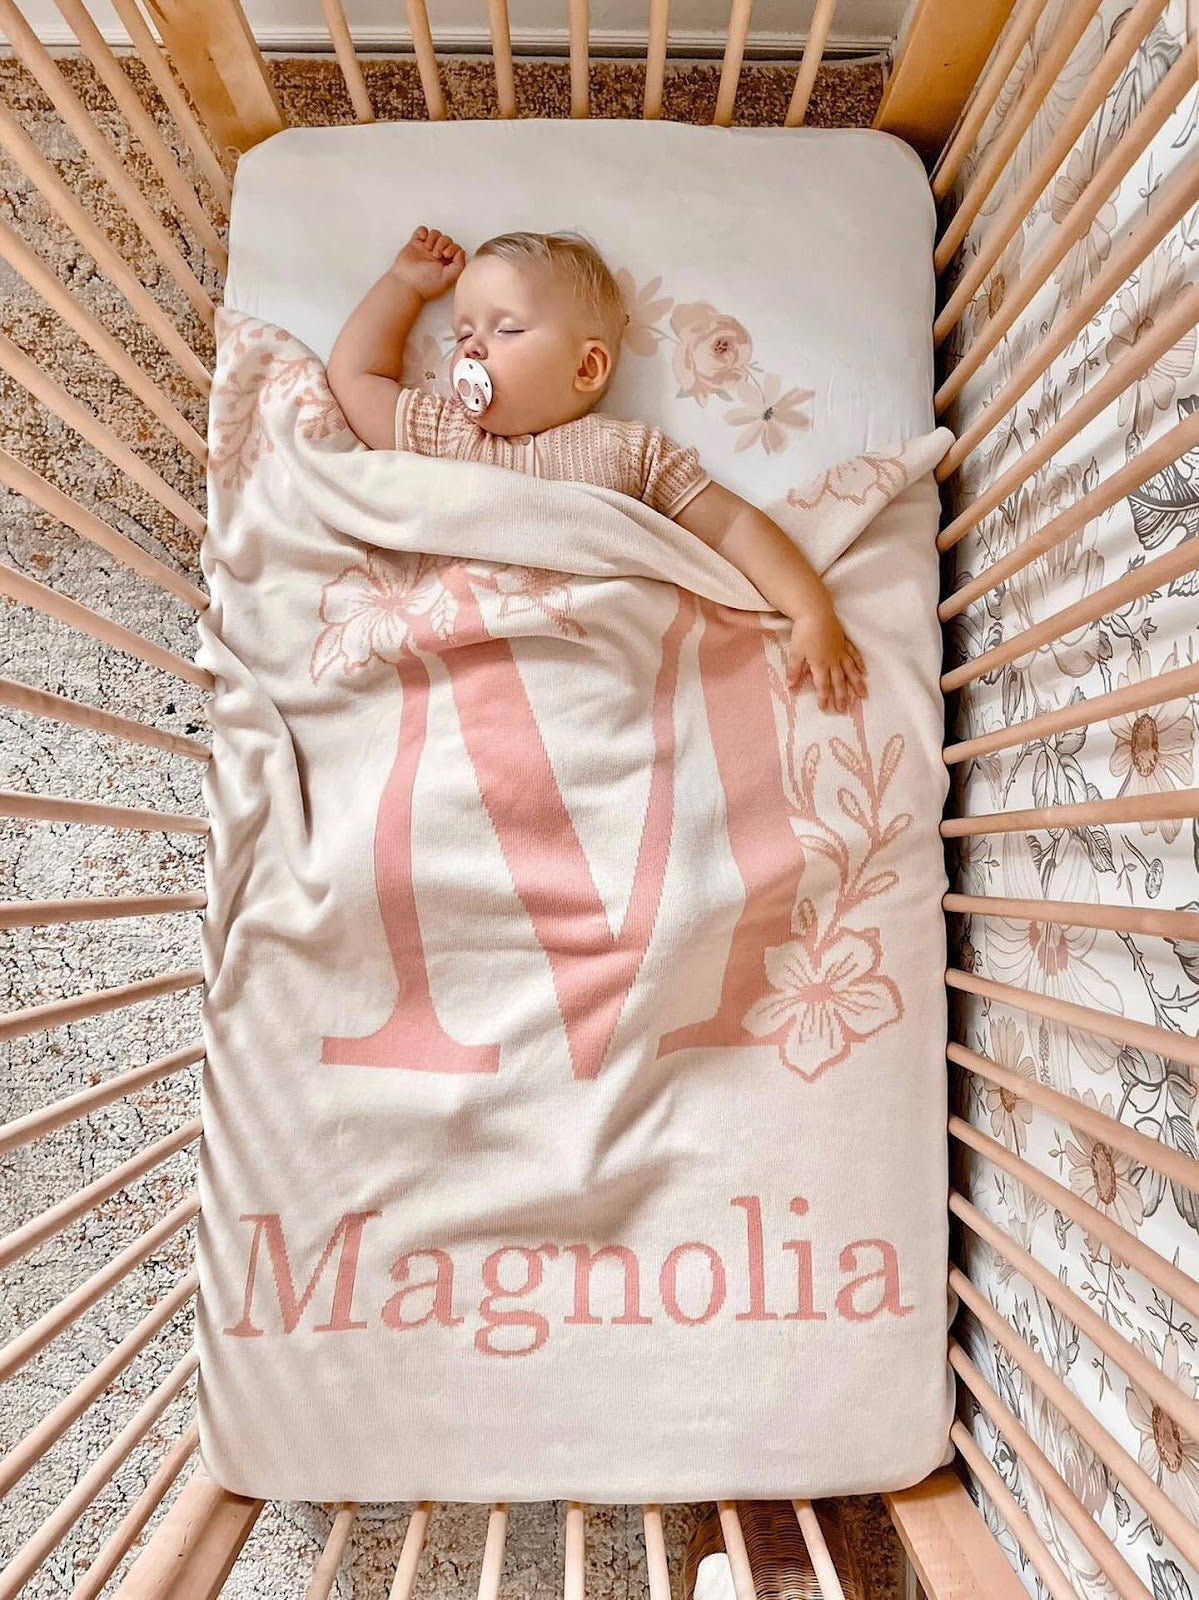 Wrap Them in Love: Why Personalised Name Blankets are the Ultimate Baby Shower Gift